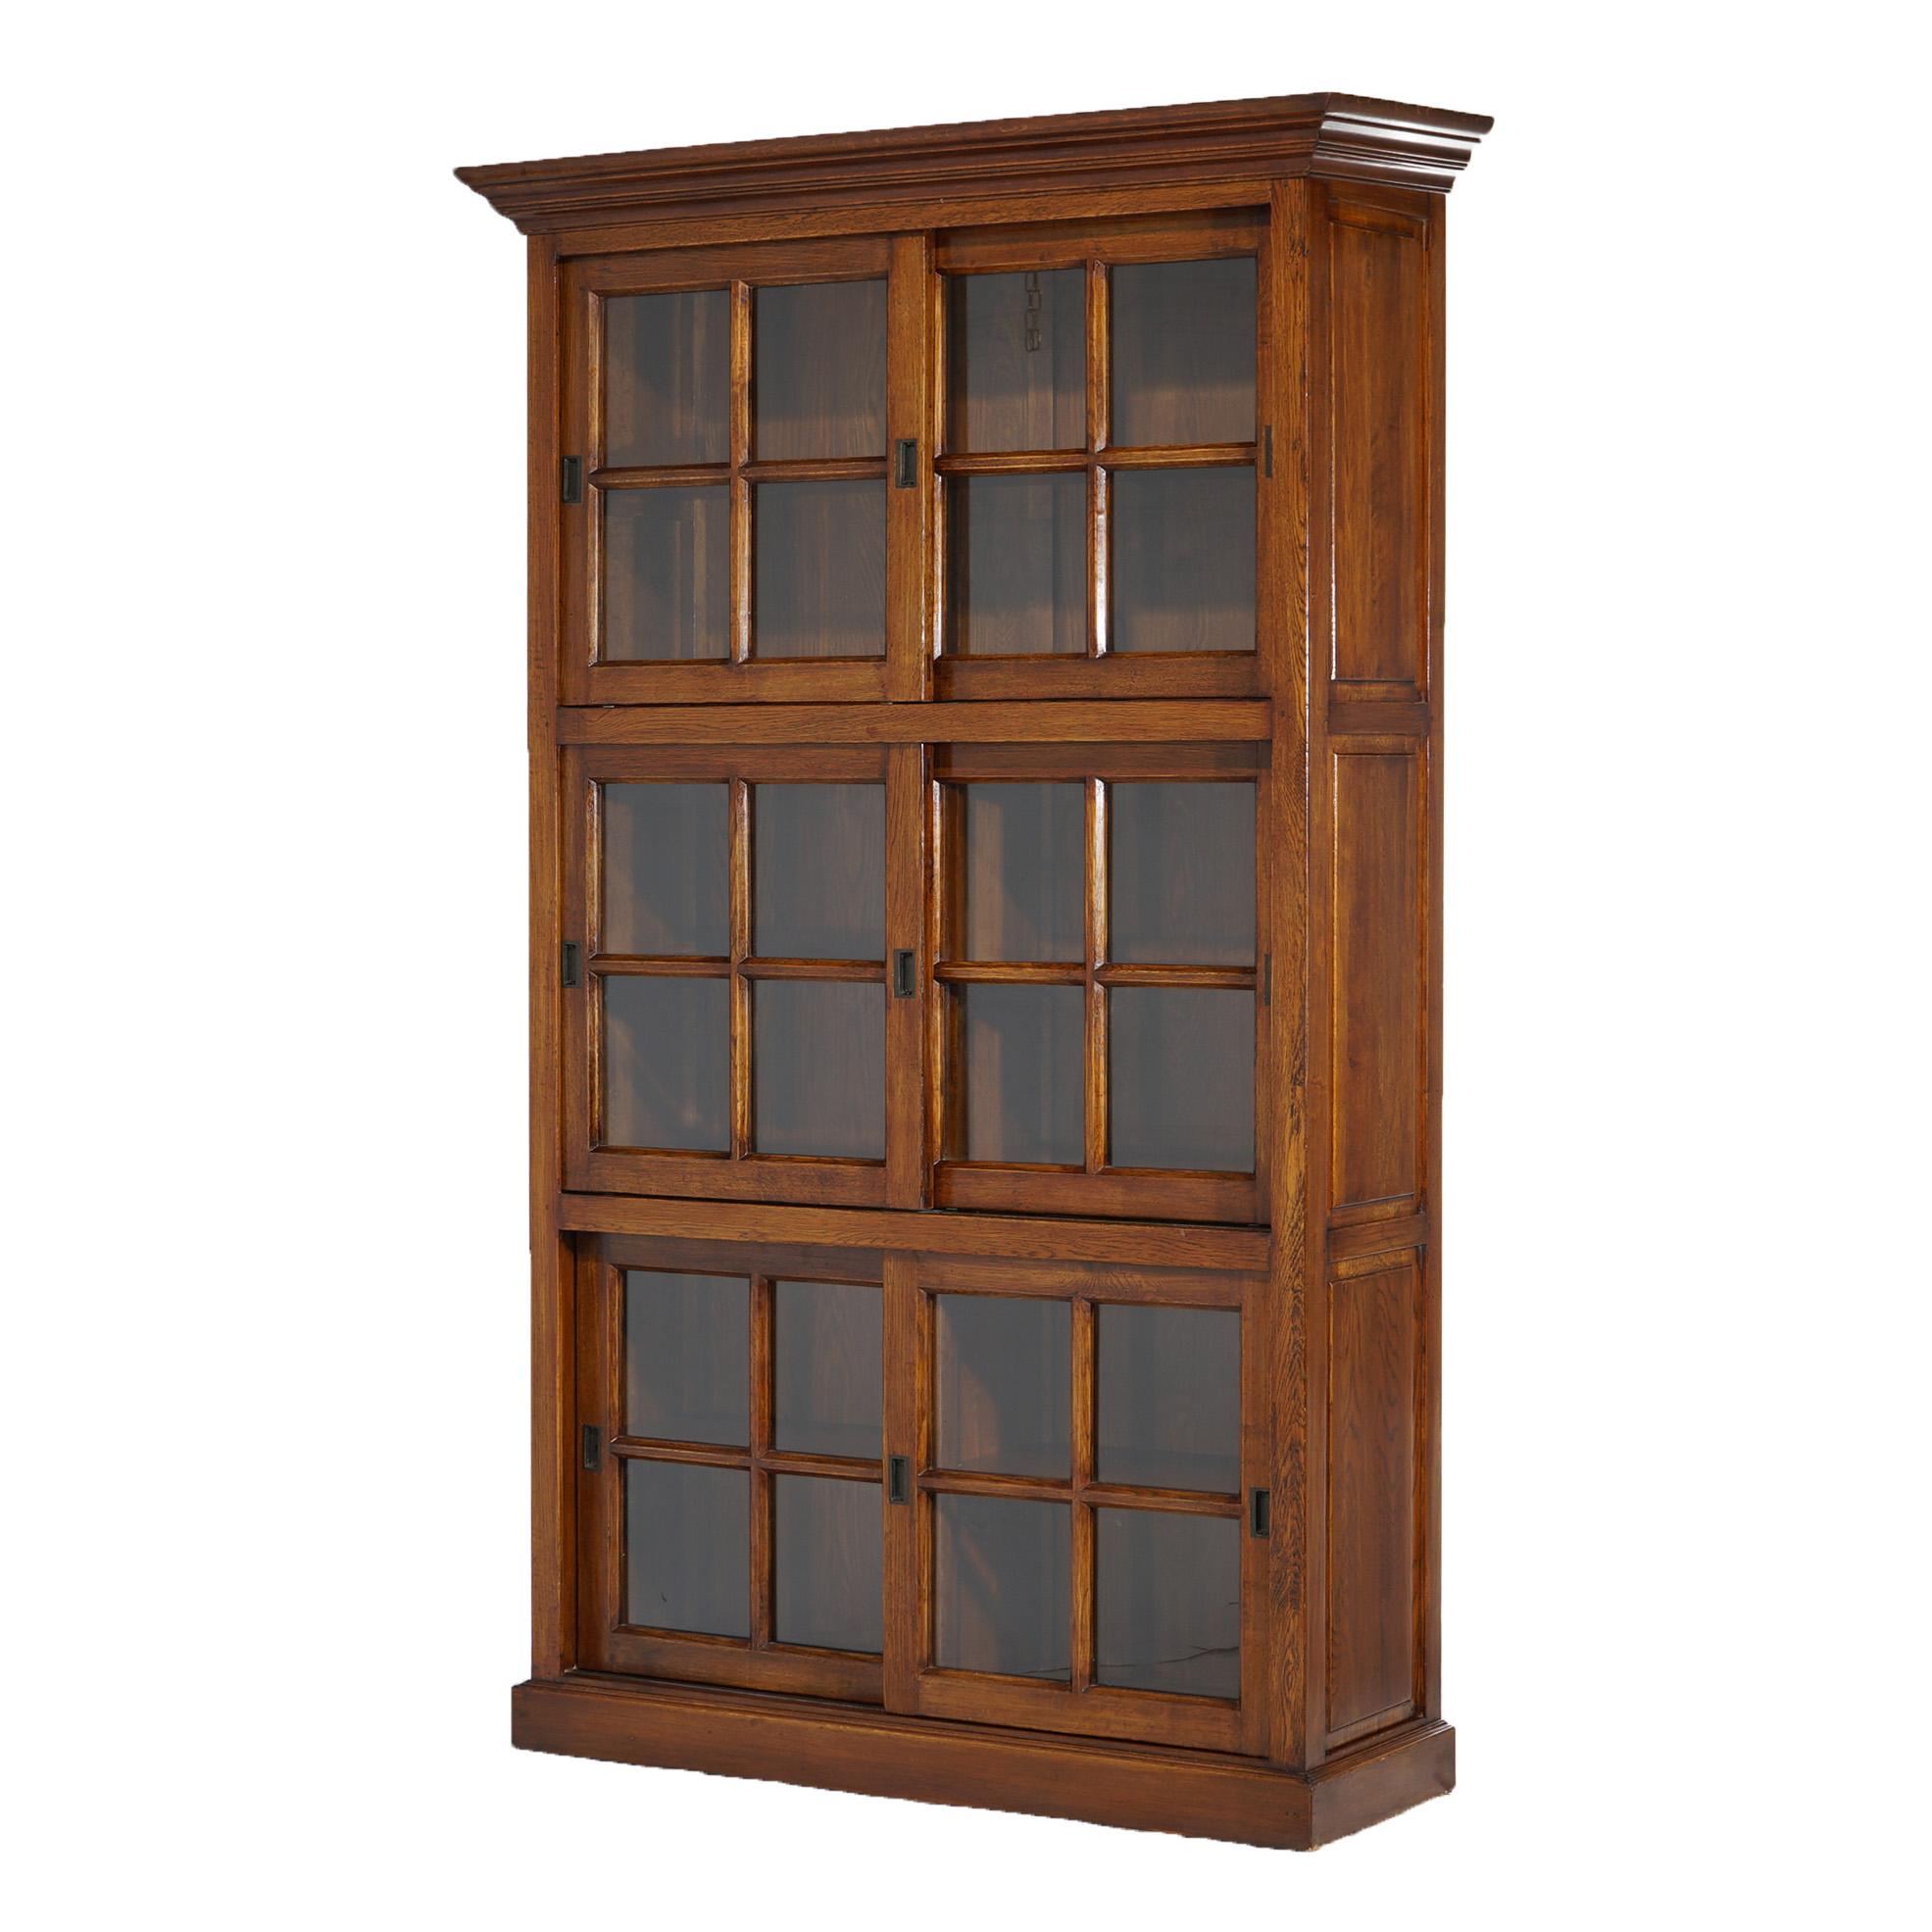 An antique Arts and Crafts Mission barrister style bookcase offers quarter sawn oak construction with three sections, each having sliding glass doors opening to divided and shelved compartments, 20th century

Measures - 85.75